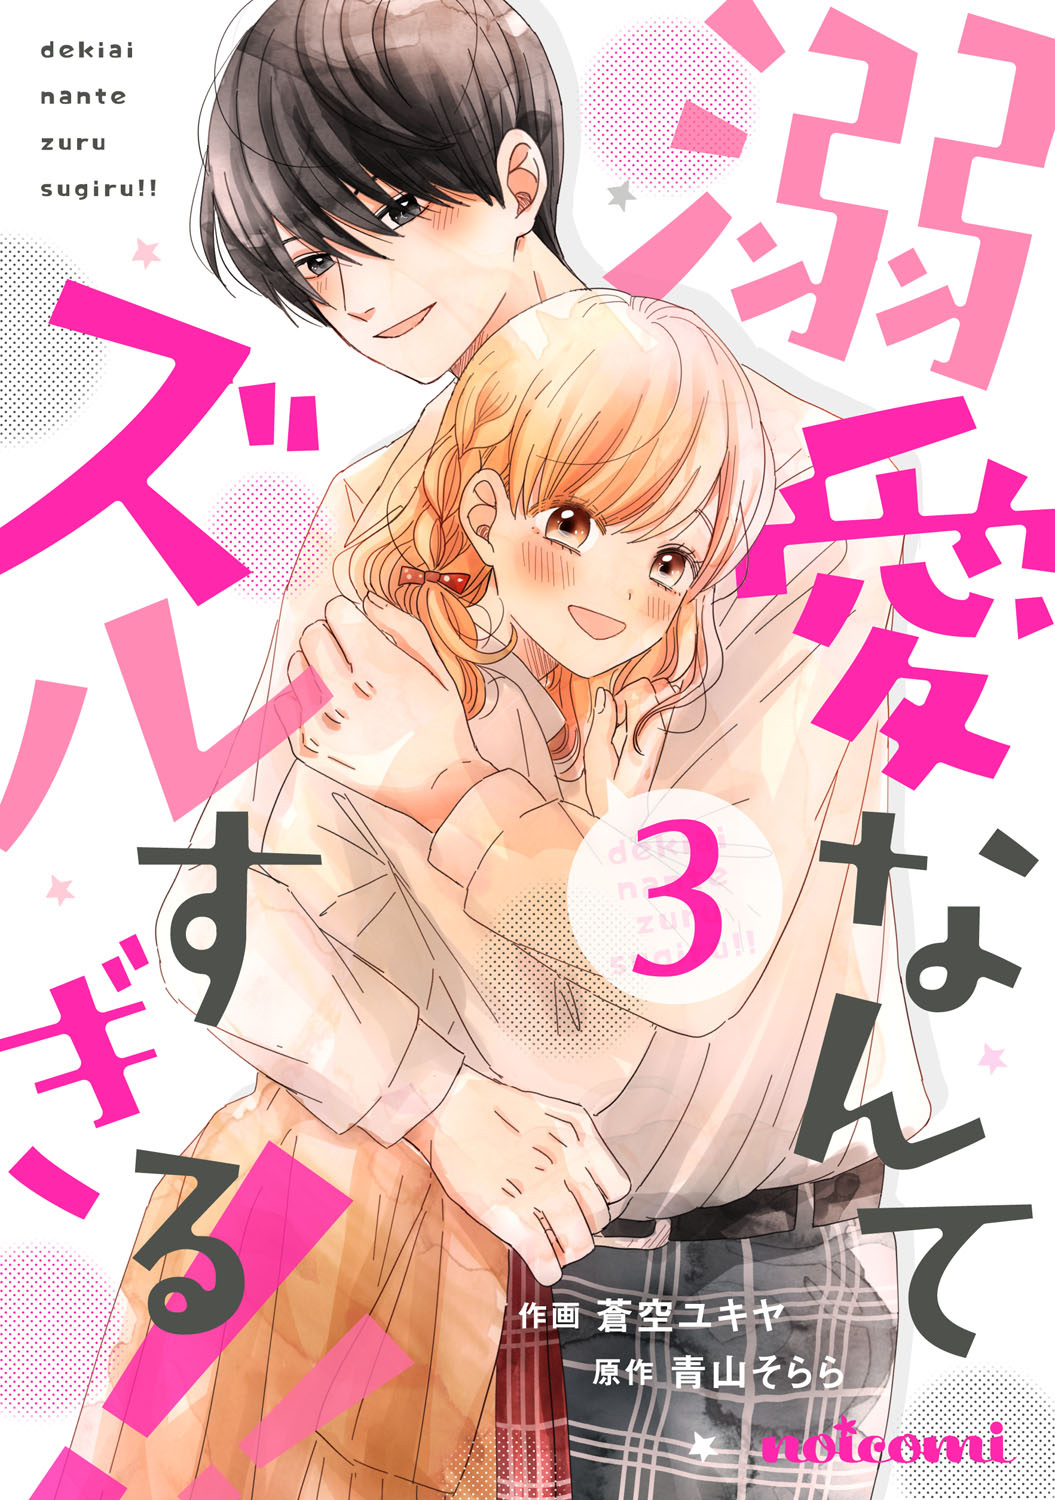 Dekiai Nante Zuru Sugiru!! Vol.3 Chapter 11: Just As I Thought, I Can't Go Out With You - Picture 1